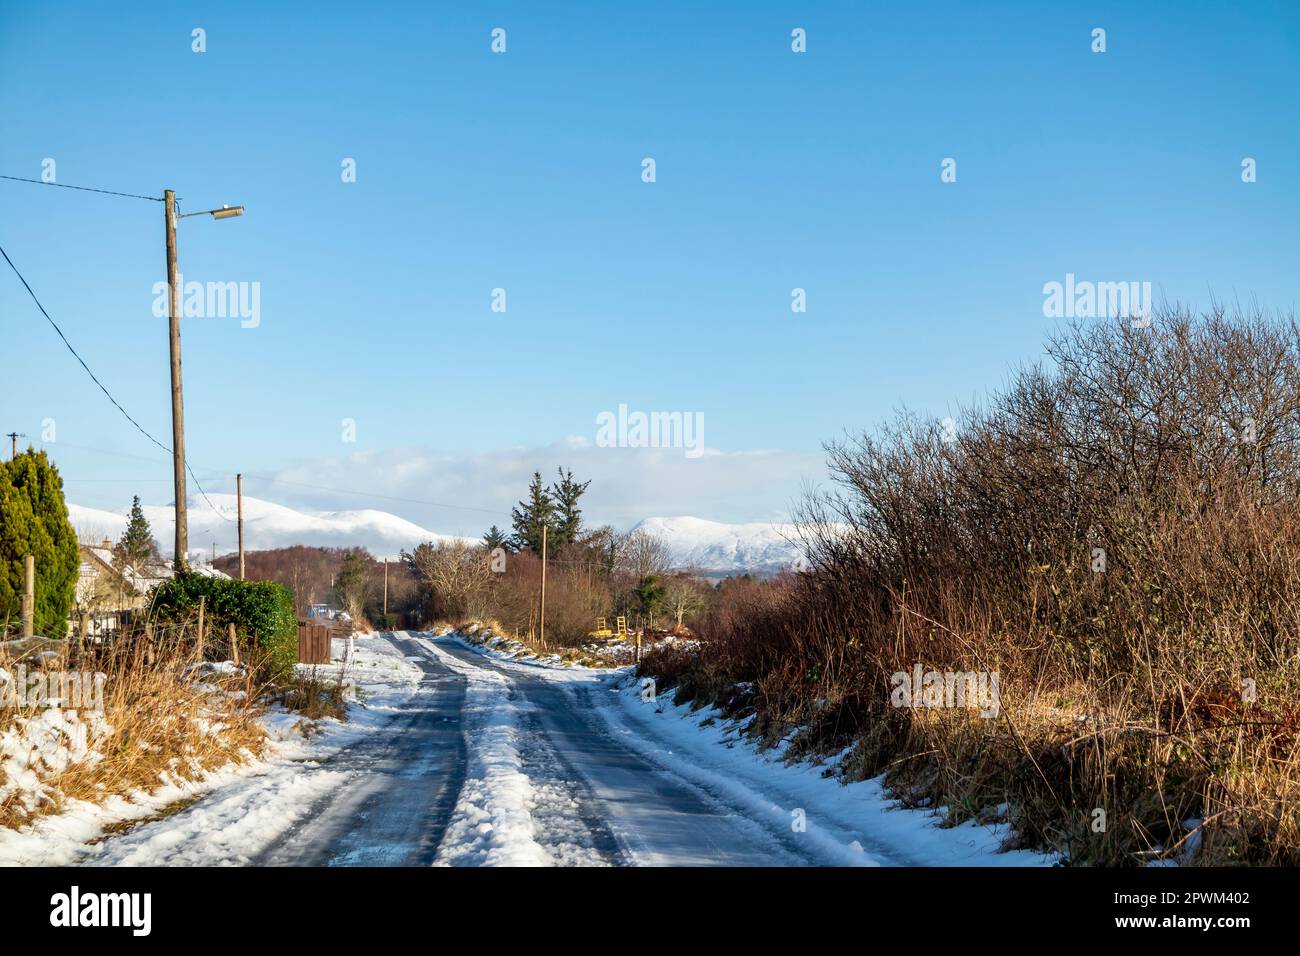 The L1783, the so called German Road, connects Doochary and Lettermacaward - County Donegal - Ireland. Stock Photo